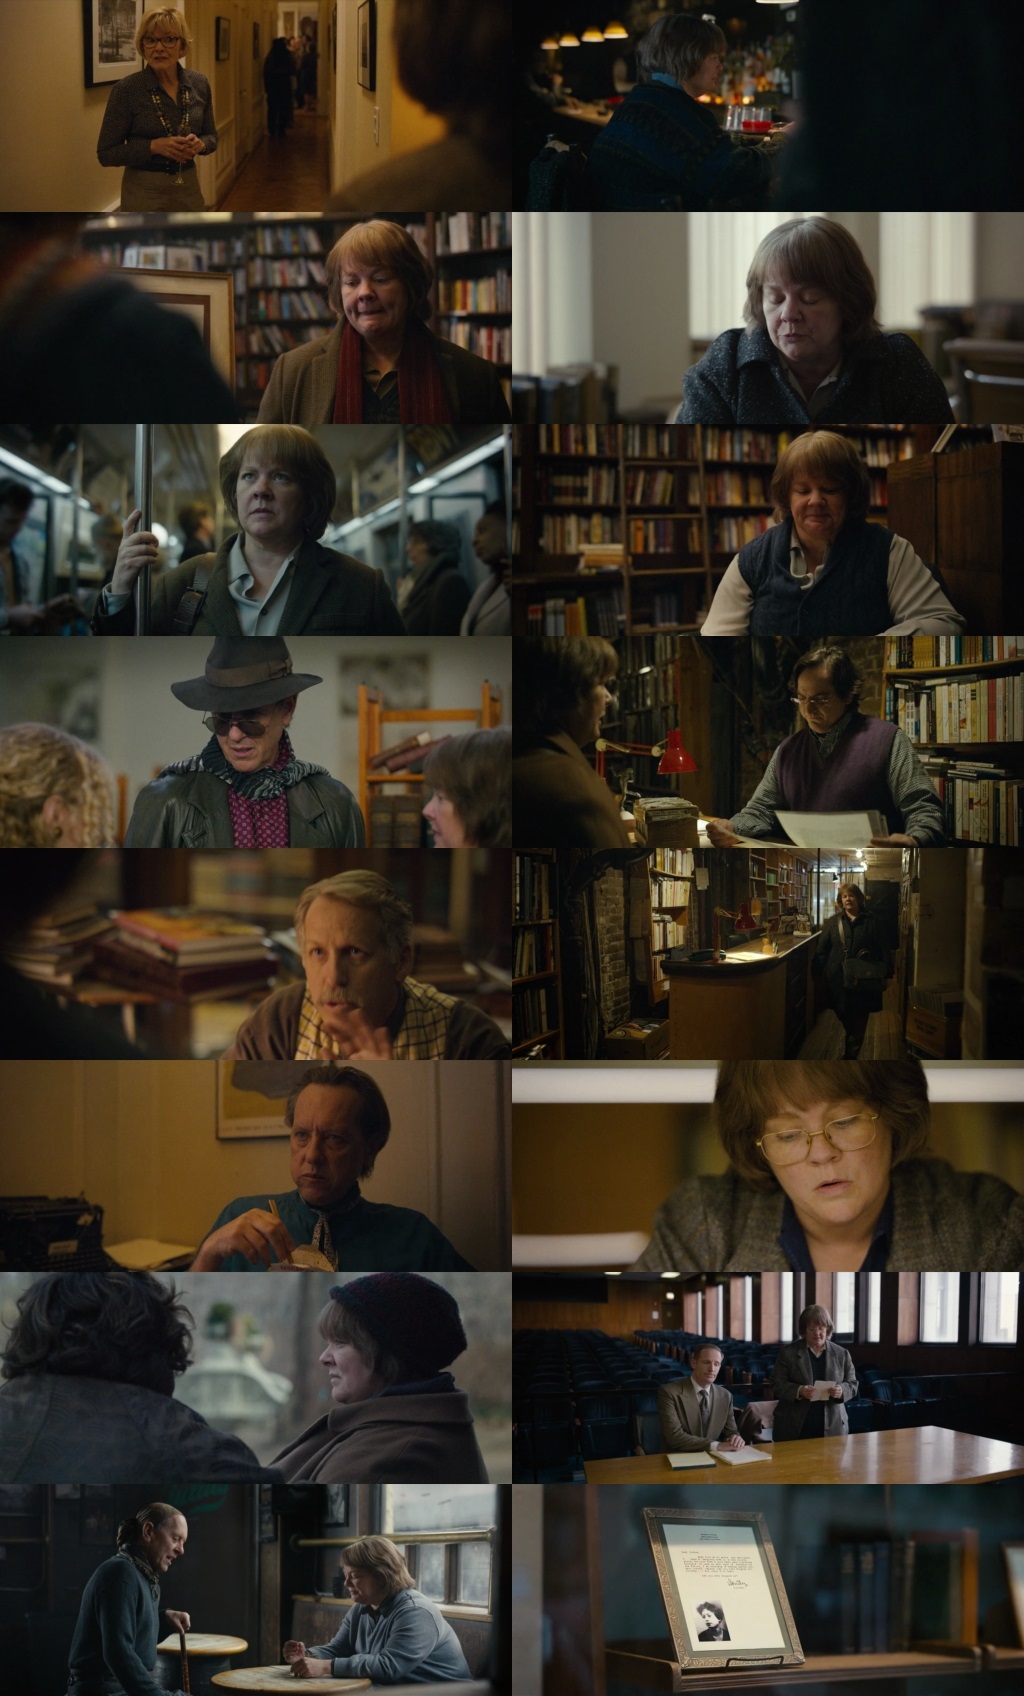 Can You Ever Forgive Me? 2018 Hindi Dual Audio BRRip Full Movie 480p Free Download